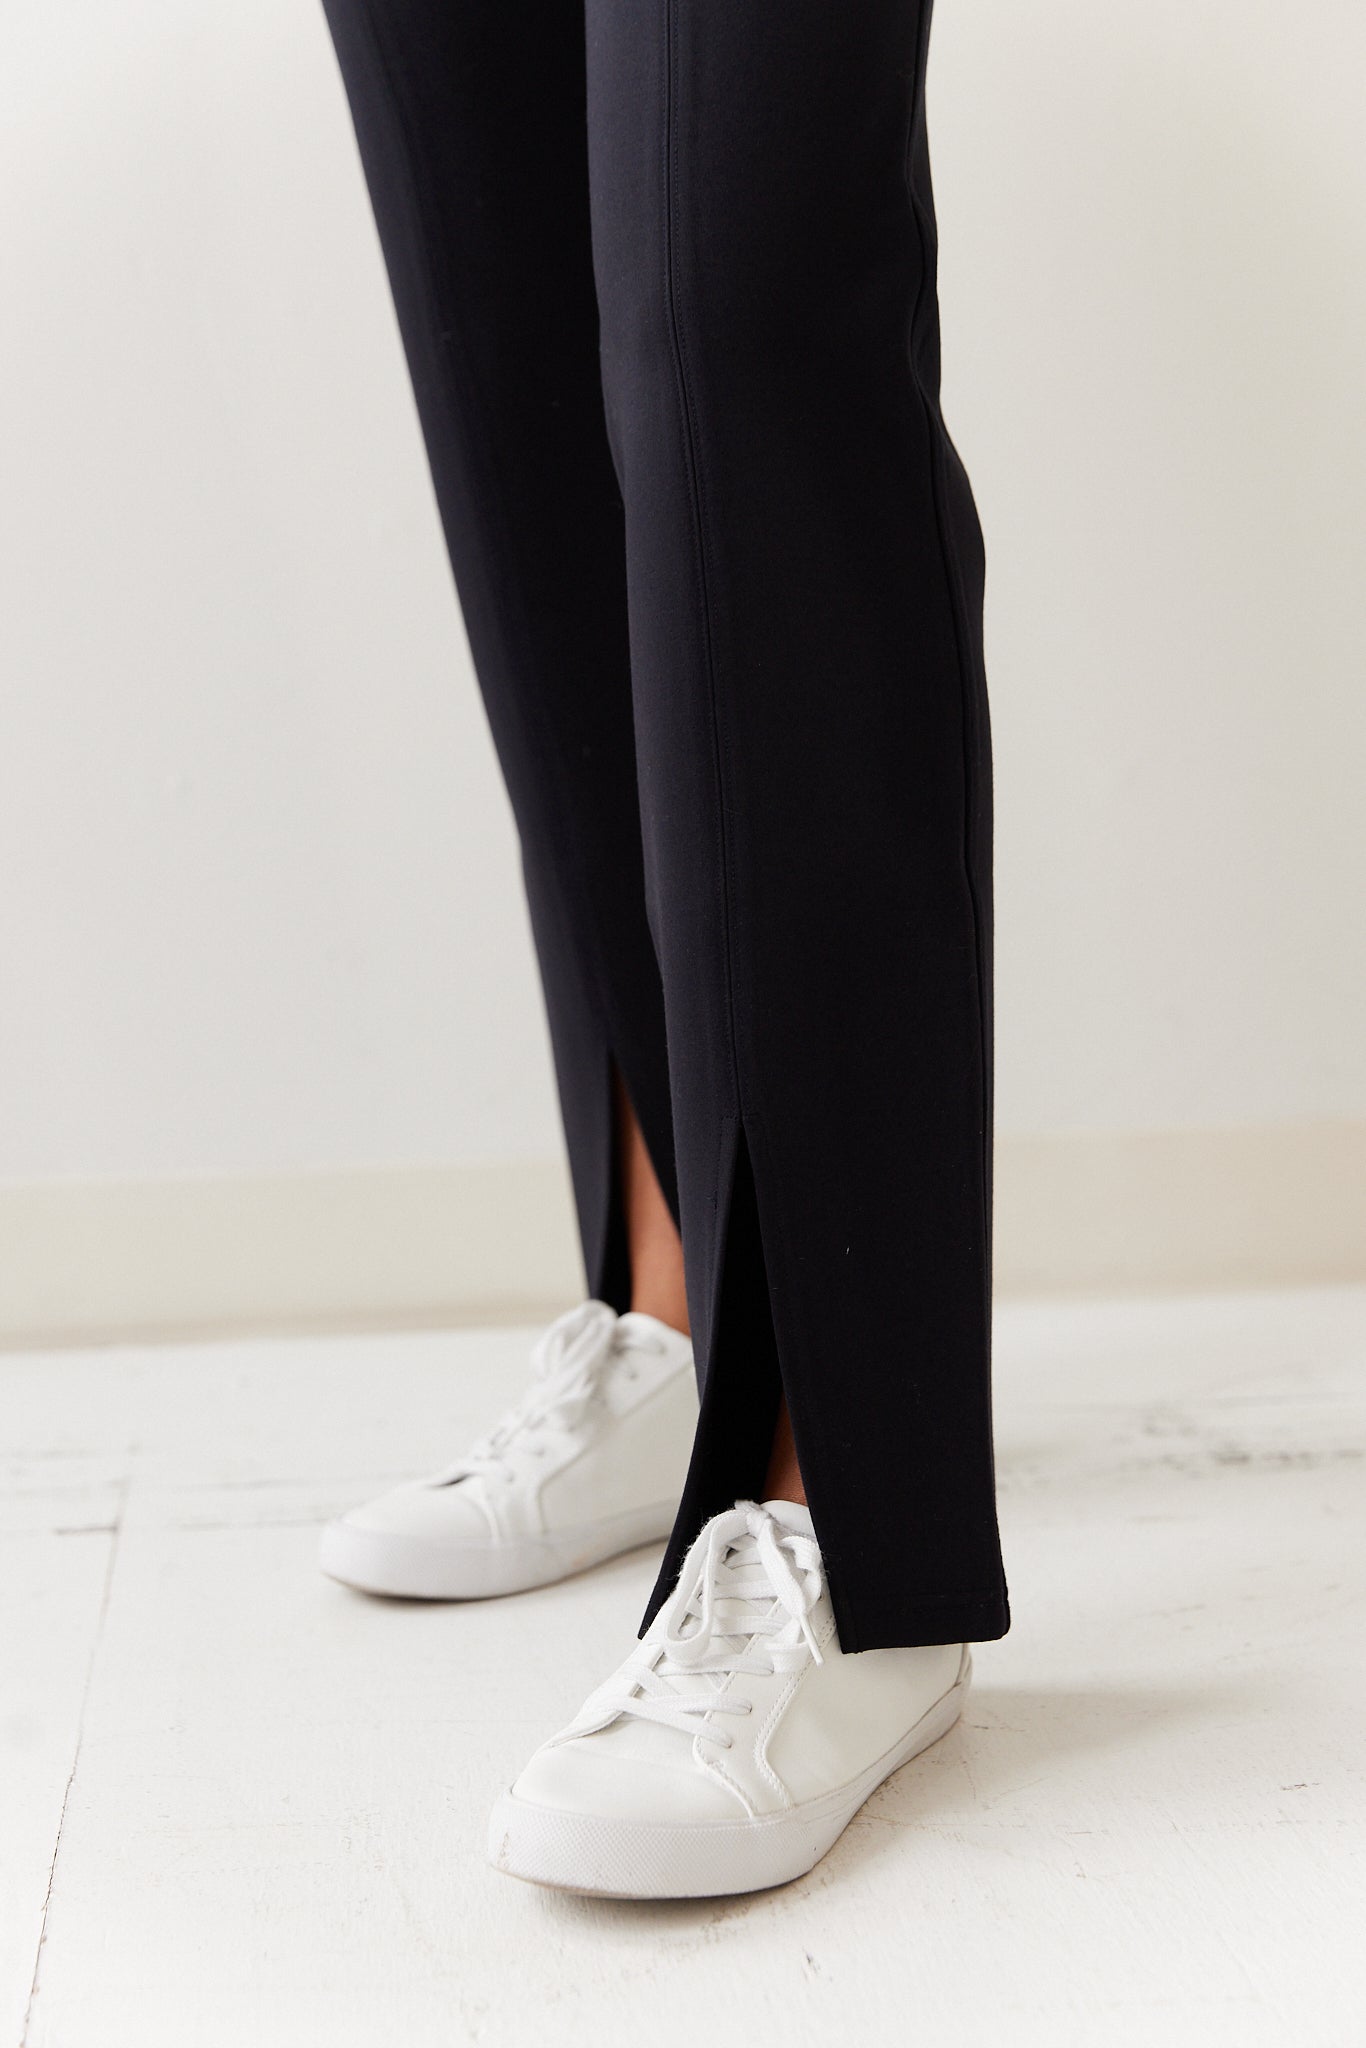 The Slit Front Ponte Pant